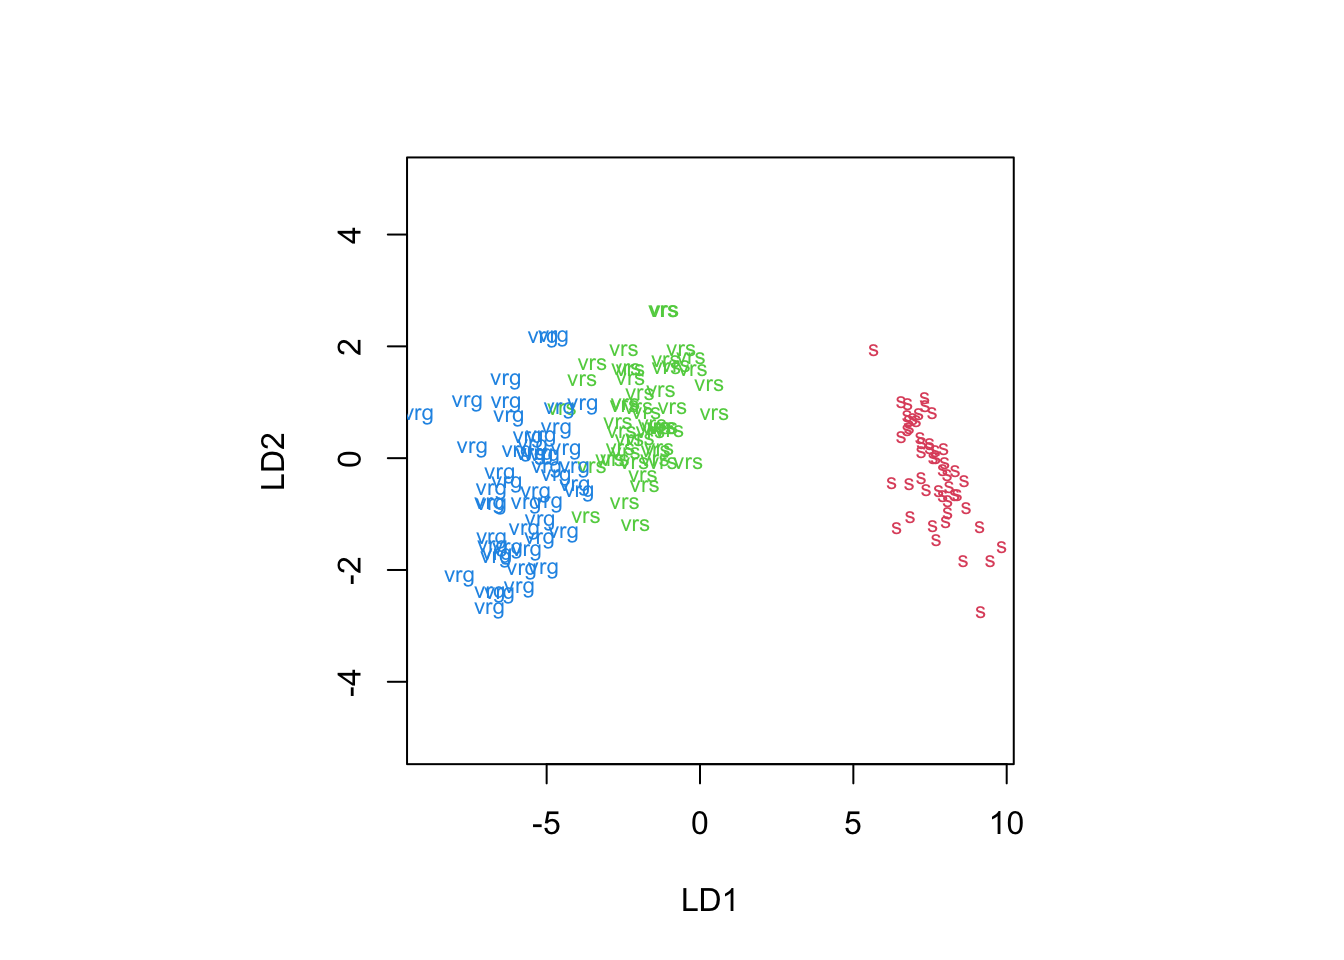 2-dimensional LDA projection of the iris data using the built-in R plotting function